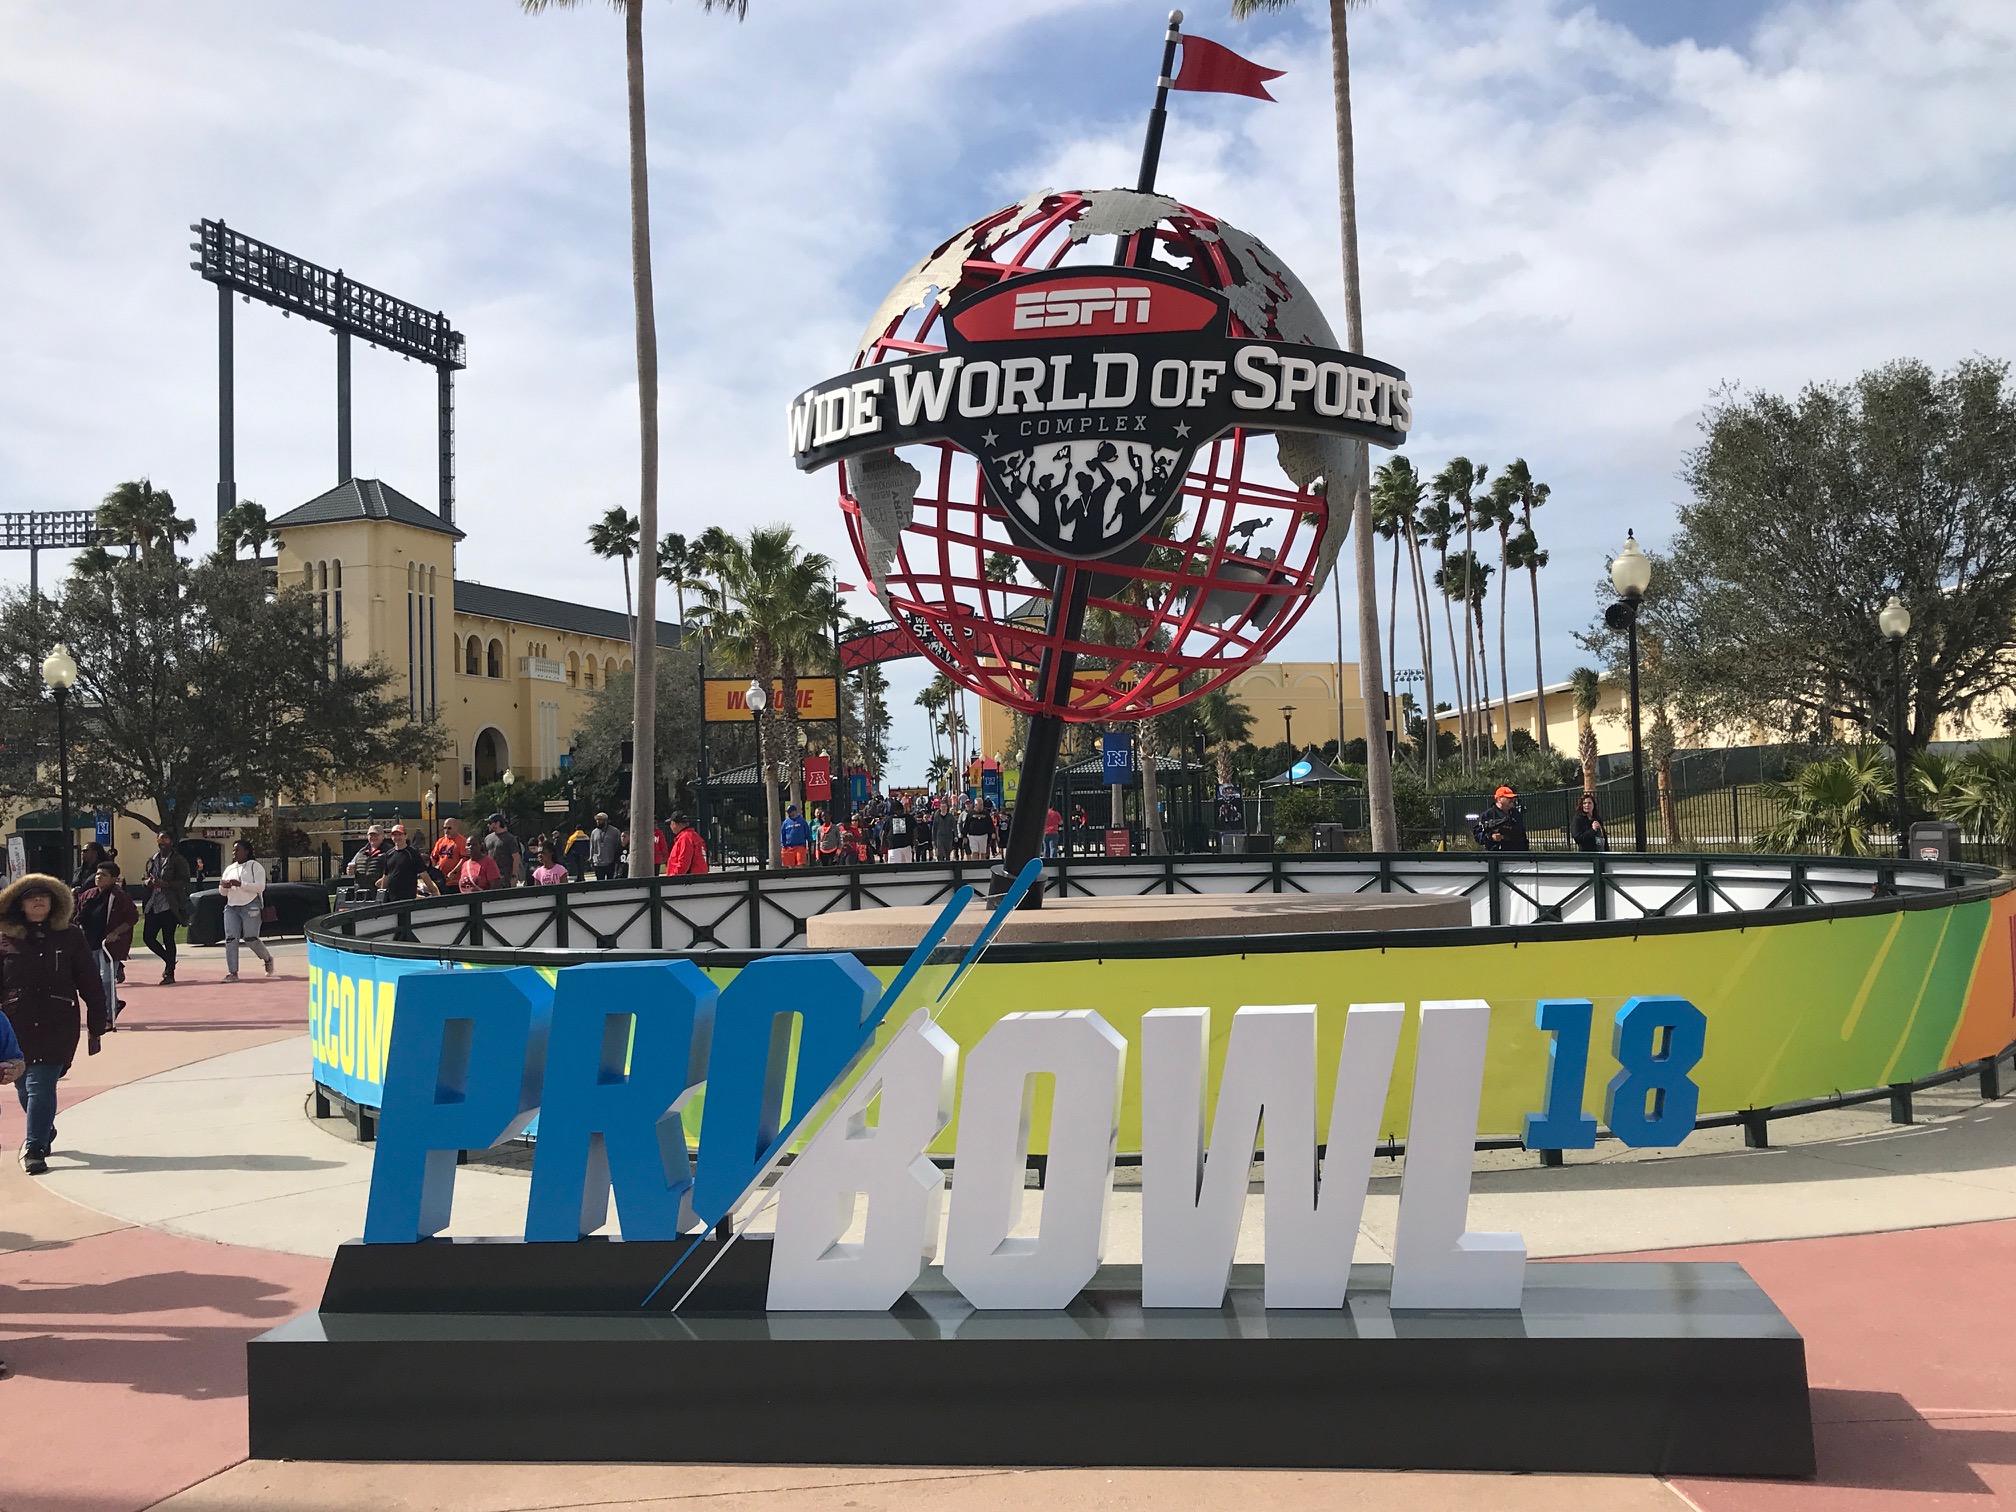 Pro Bowl Experience Returns to Disney World for 2018